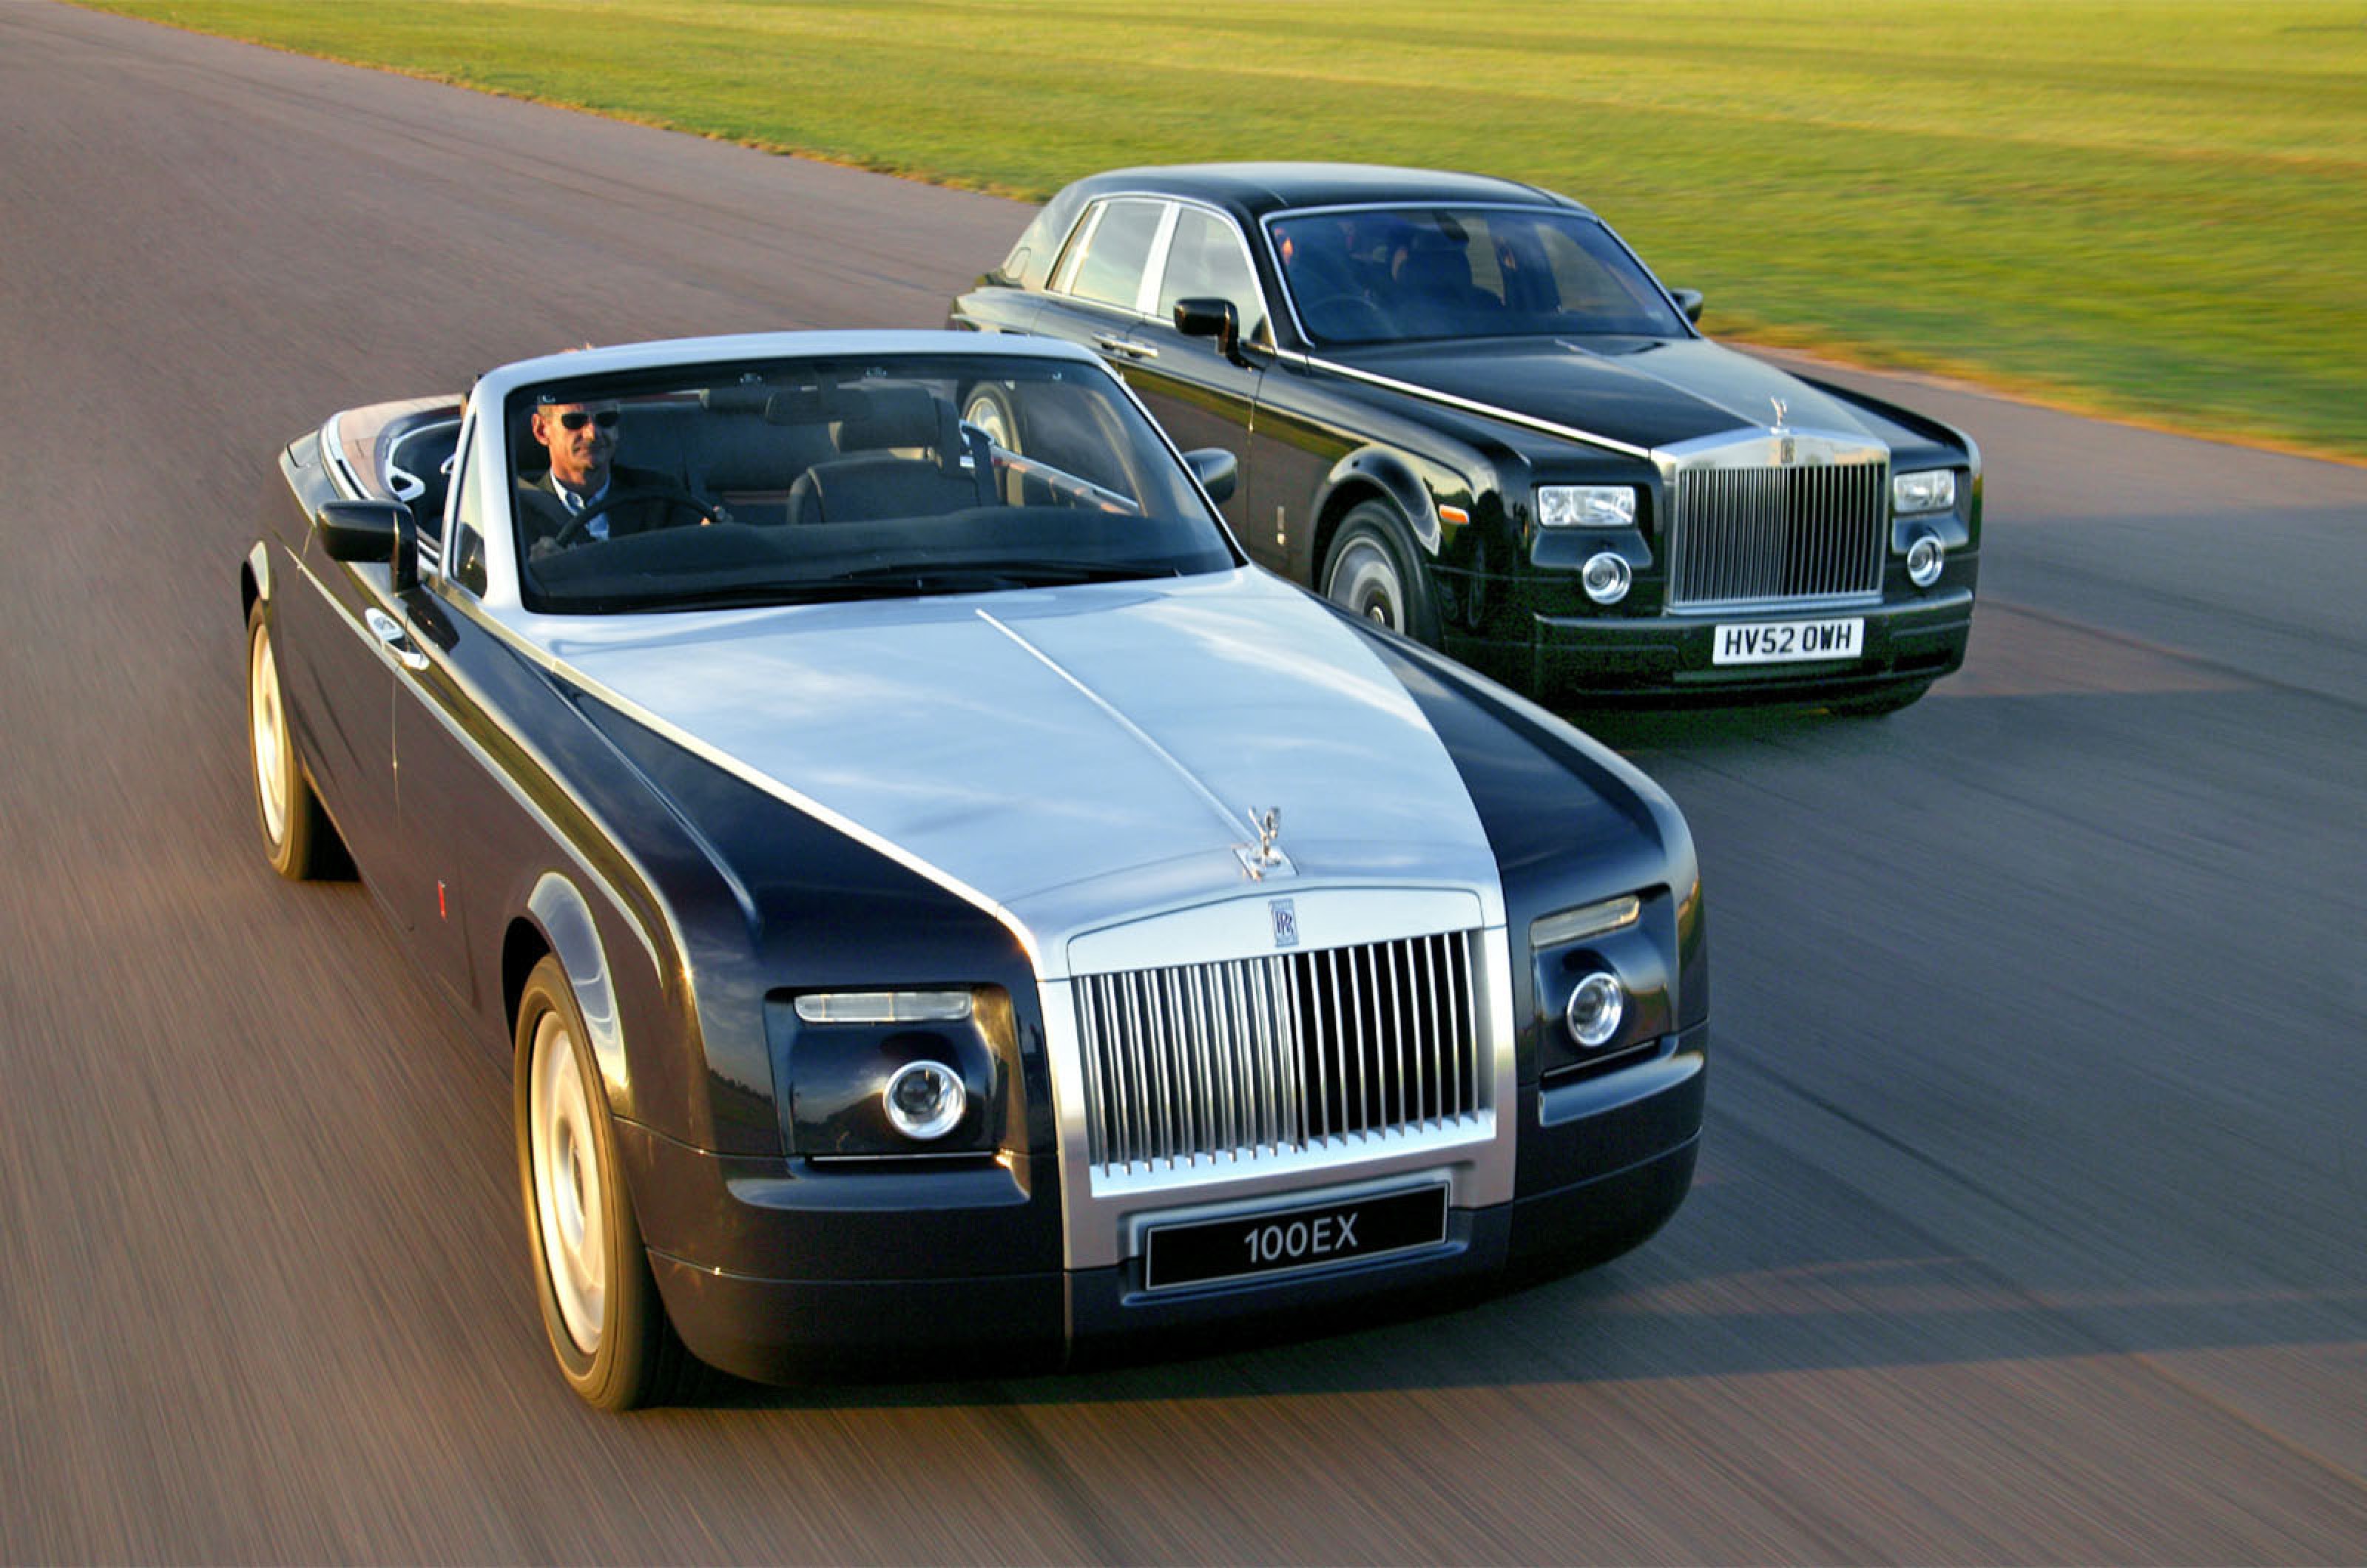 <p>To celebrate its centenary, Rolls-Royce unveiled the lavish 100EX, an open-top, four-seat, two-door experimental vehicle designed to evaluate new systems, components and features.</p>  <p>Based around the then-new Phantom model’s aluminium spaceframe, the 100EX was powered by a 9-litre, 64-valve engine delivering drive to the rear wheels through a six-speed automatic gearbox.</p>  <p>Typically, Rolls-Royce remained coy about the origins of the engine, though output was quoted as 759bhp at 5900rpm, and a prodigious 1100lb ft of torque at just 2900rpm.</p>